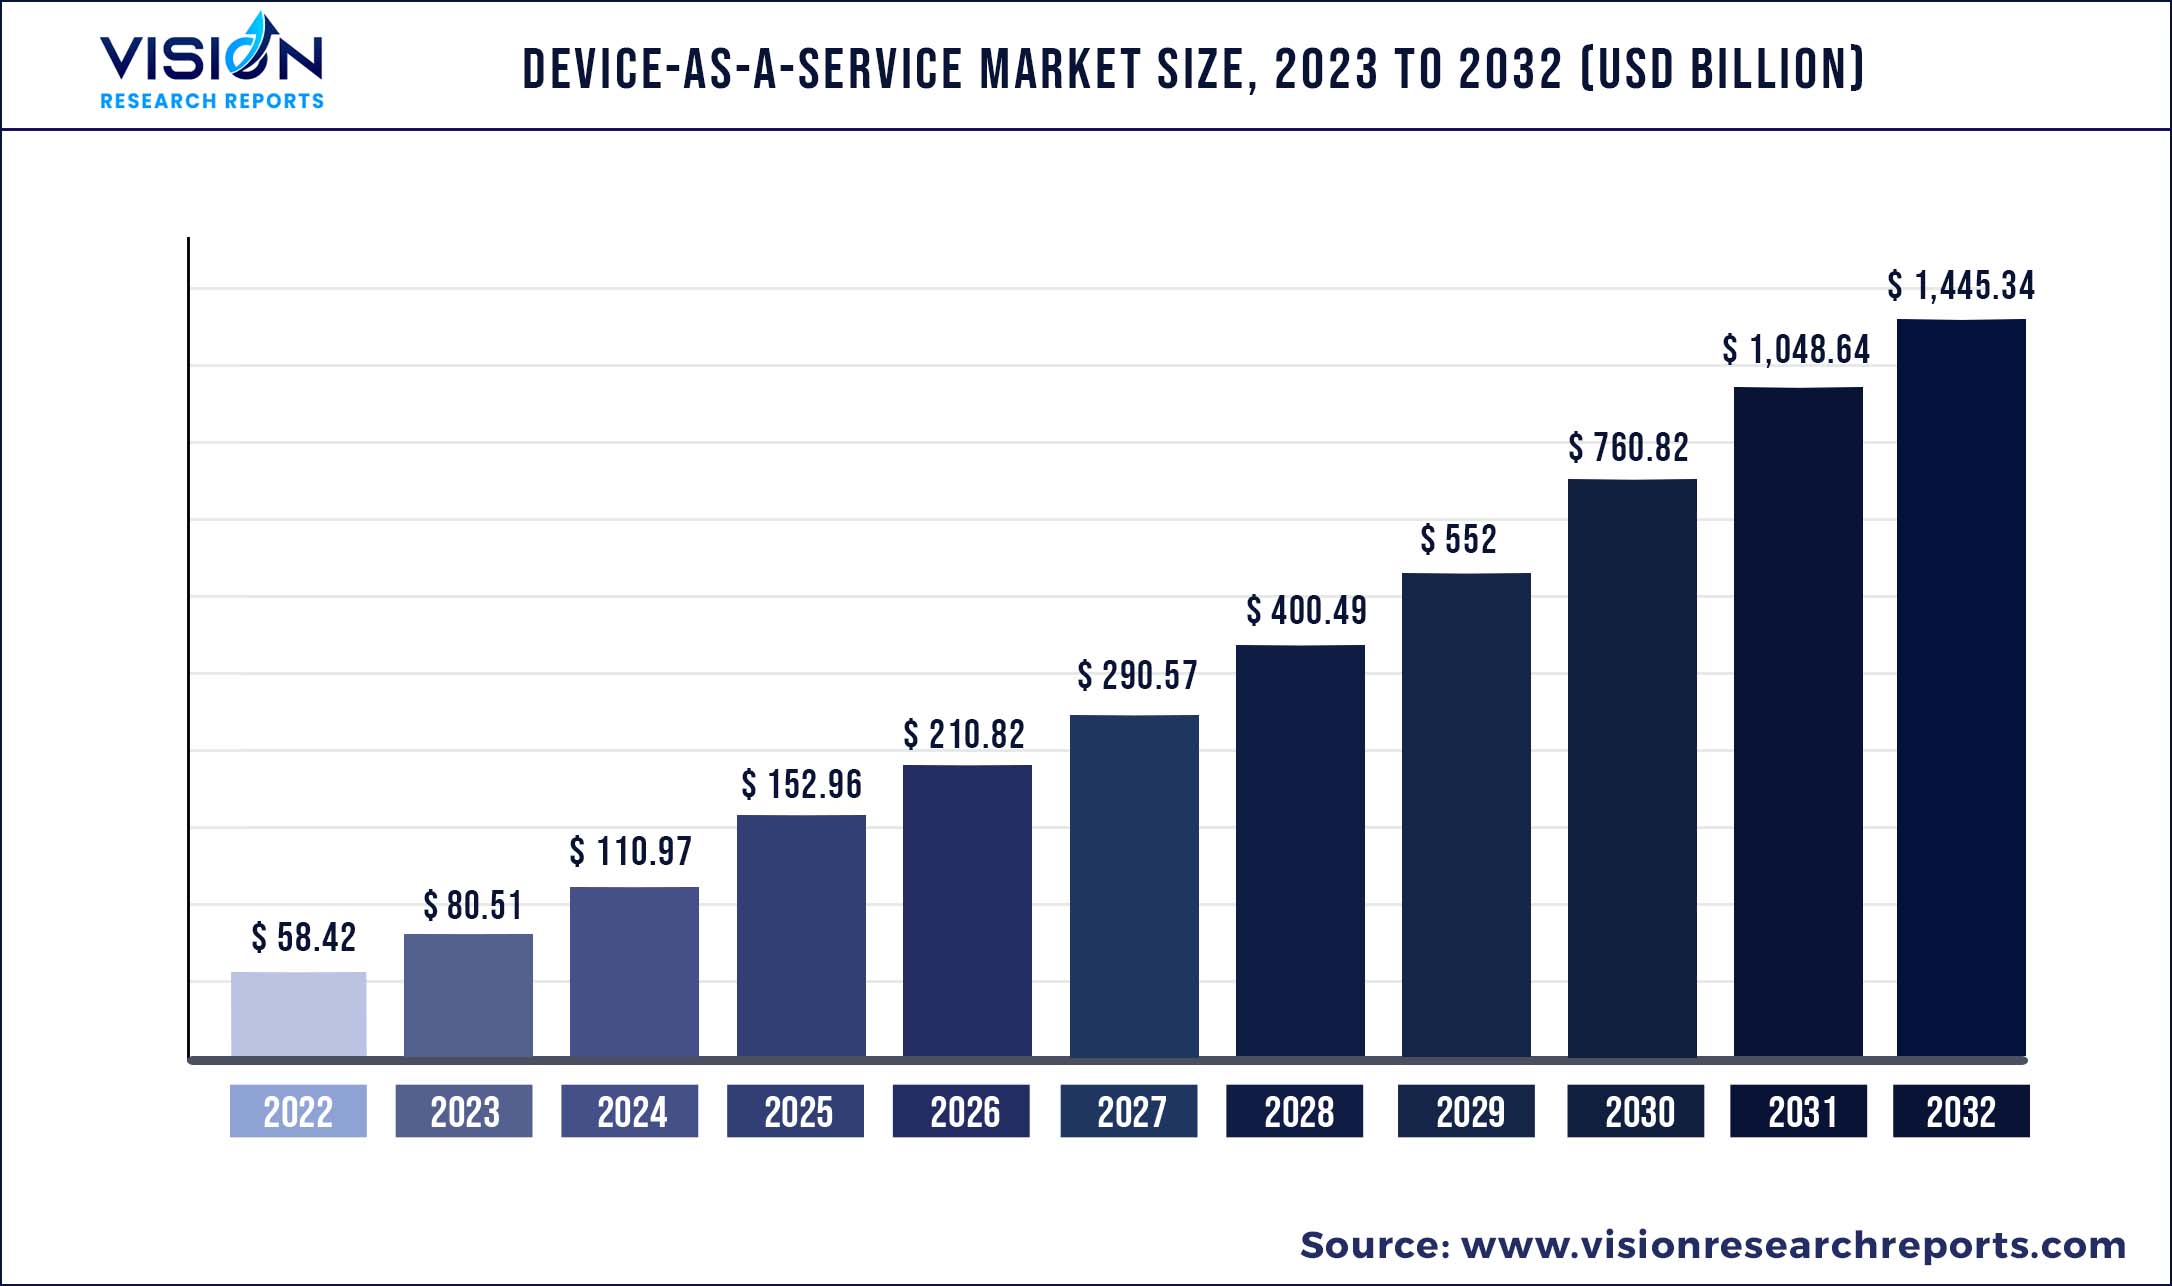 Device-as-a-Service Market Size 2023 to 2032